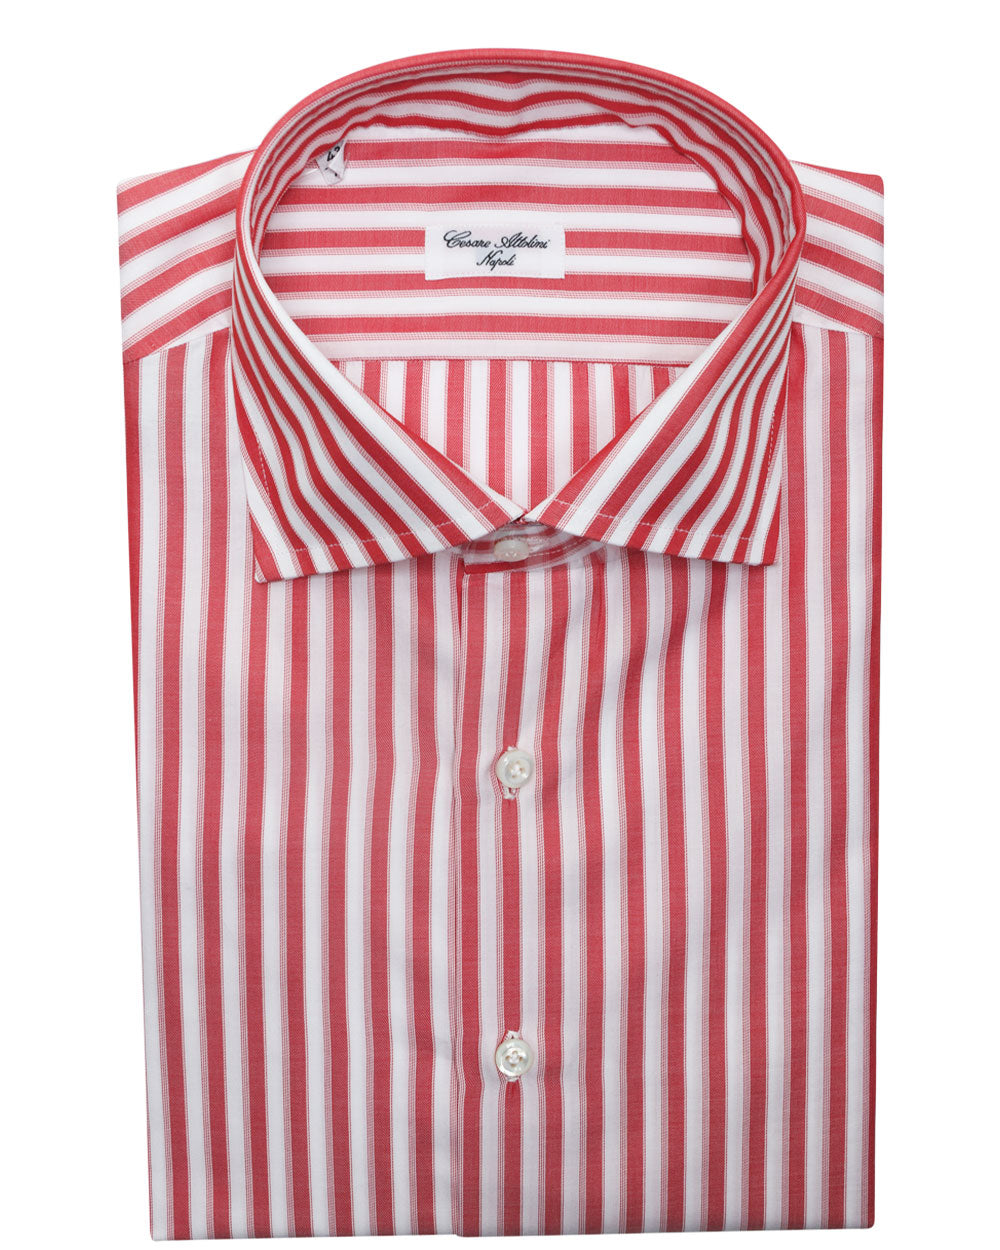 Berry and White Striped Cotton Sportshirt